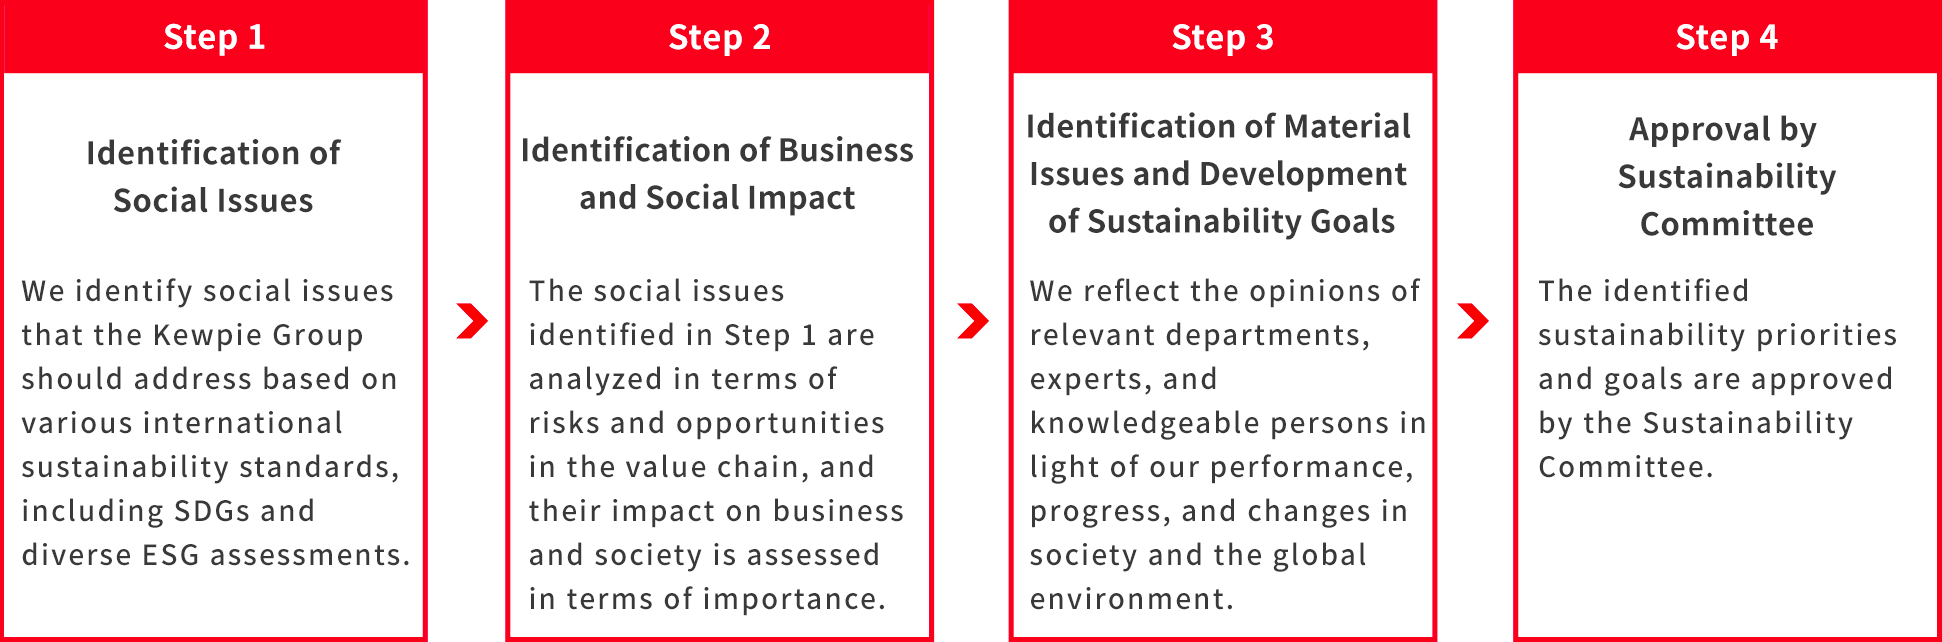 Step 1: Identification of Social Issues We identify social issues that the Kewpie Group should address based on various international sustainability standards, including SDGs and diverse ESG assessments. Step 2:Identification of Business and Social Impact The social issues identified in Step 1 are analyzed in terms of risks and opportunities in the value chain, and their impact on business and society is assessed in terms of importance. Step 3: Identification of Material Issues and Development of Sustainability Goals We reflect the opinions of relevant departments, experts, and knowledgeable persons in light of our performance, progress, and changes in society and the global environment. Step 4: Approval by Sustainability Committee The identified sustainability priorities and goals are approved by the Sustainability Committee. 